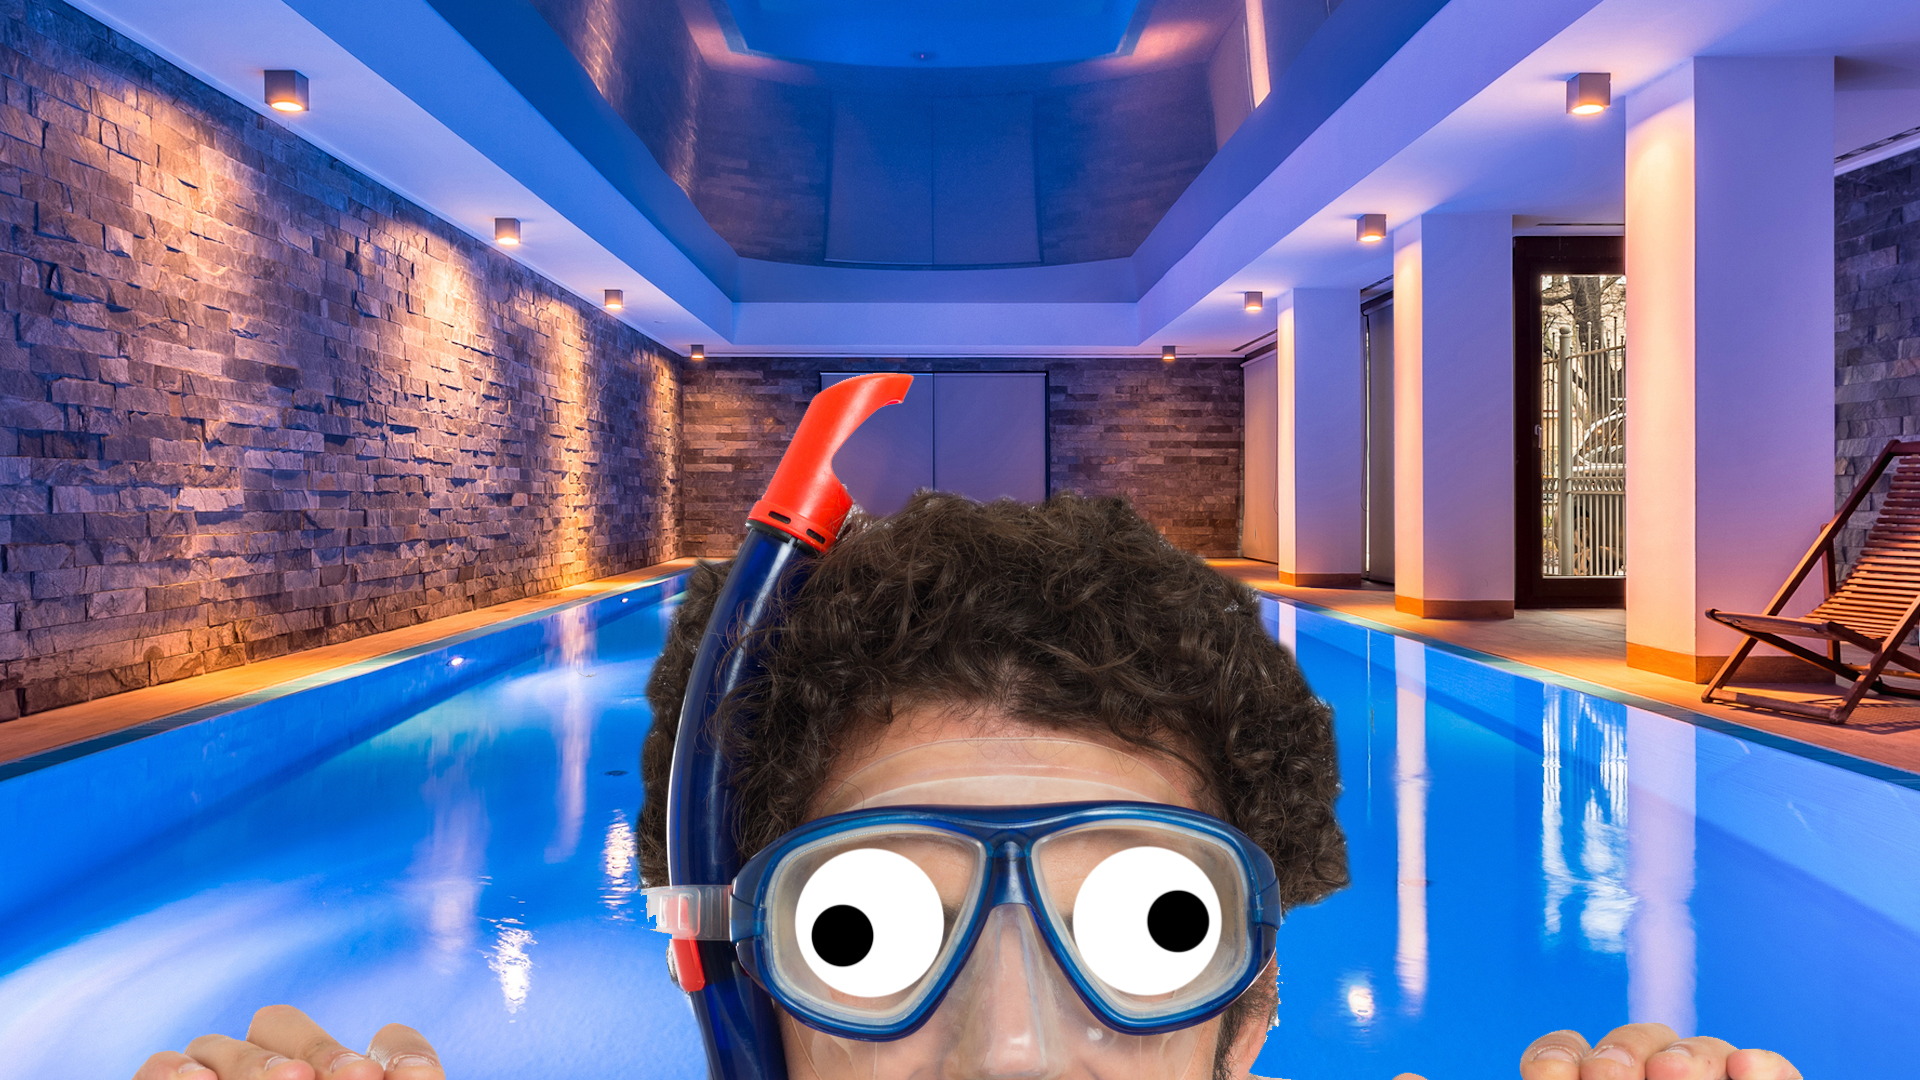 A man in a snorkel at a fancy swimming pool